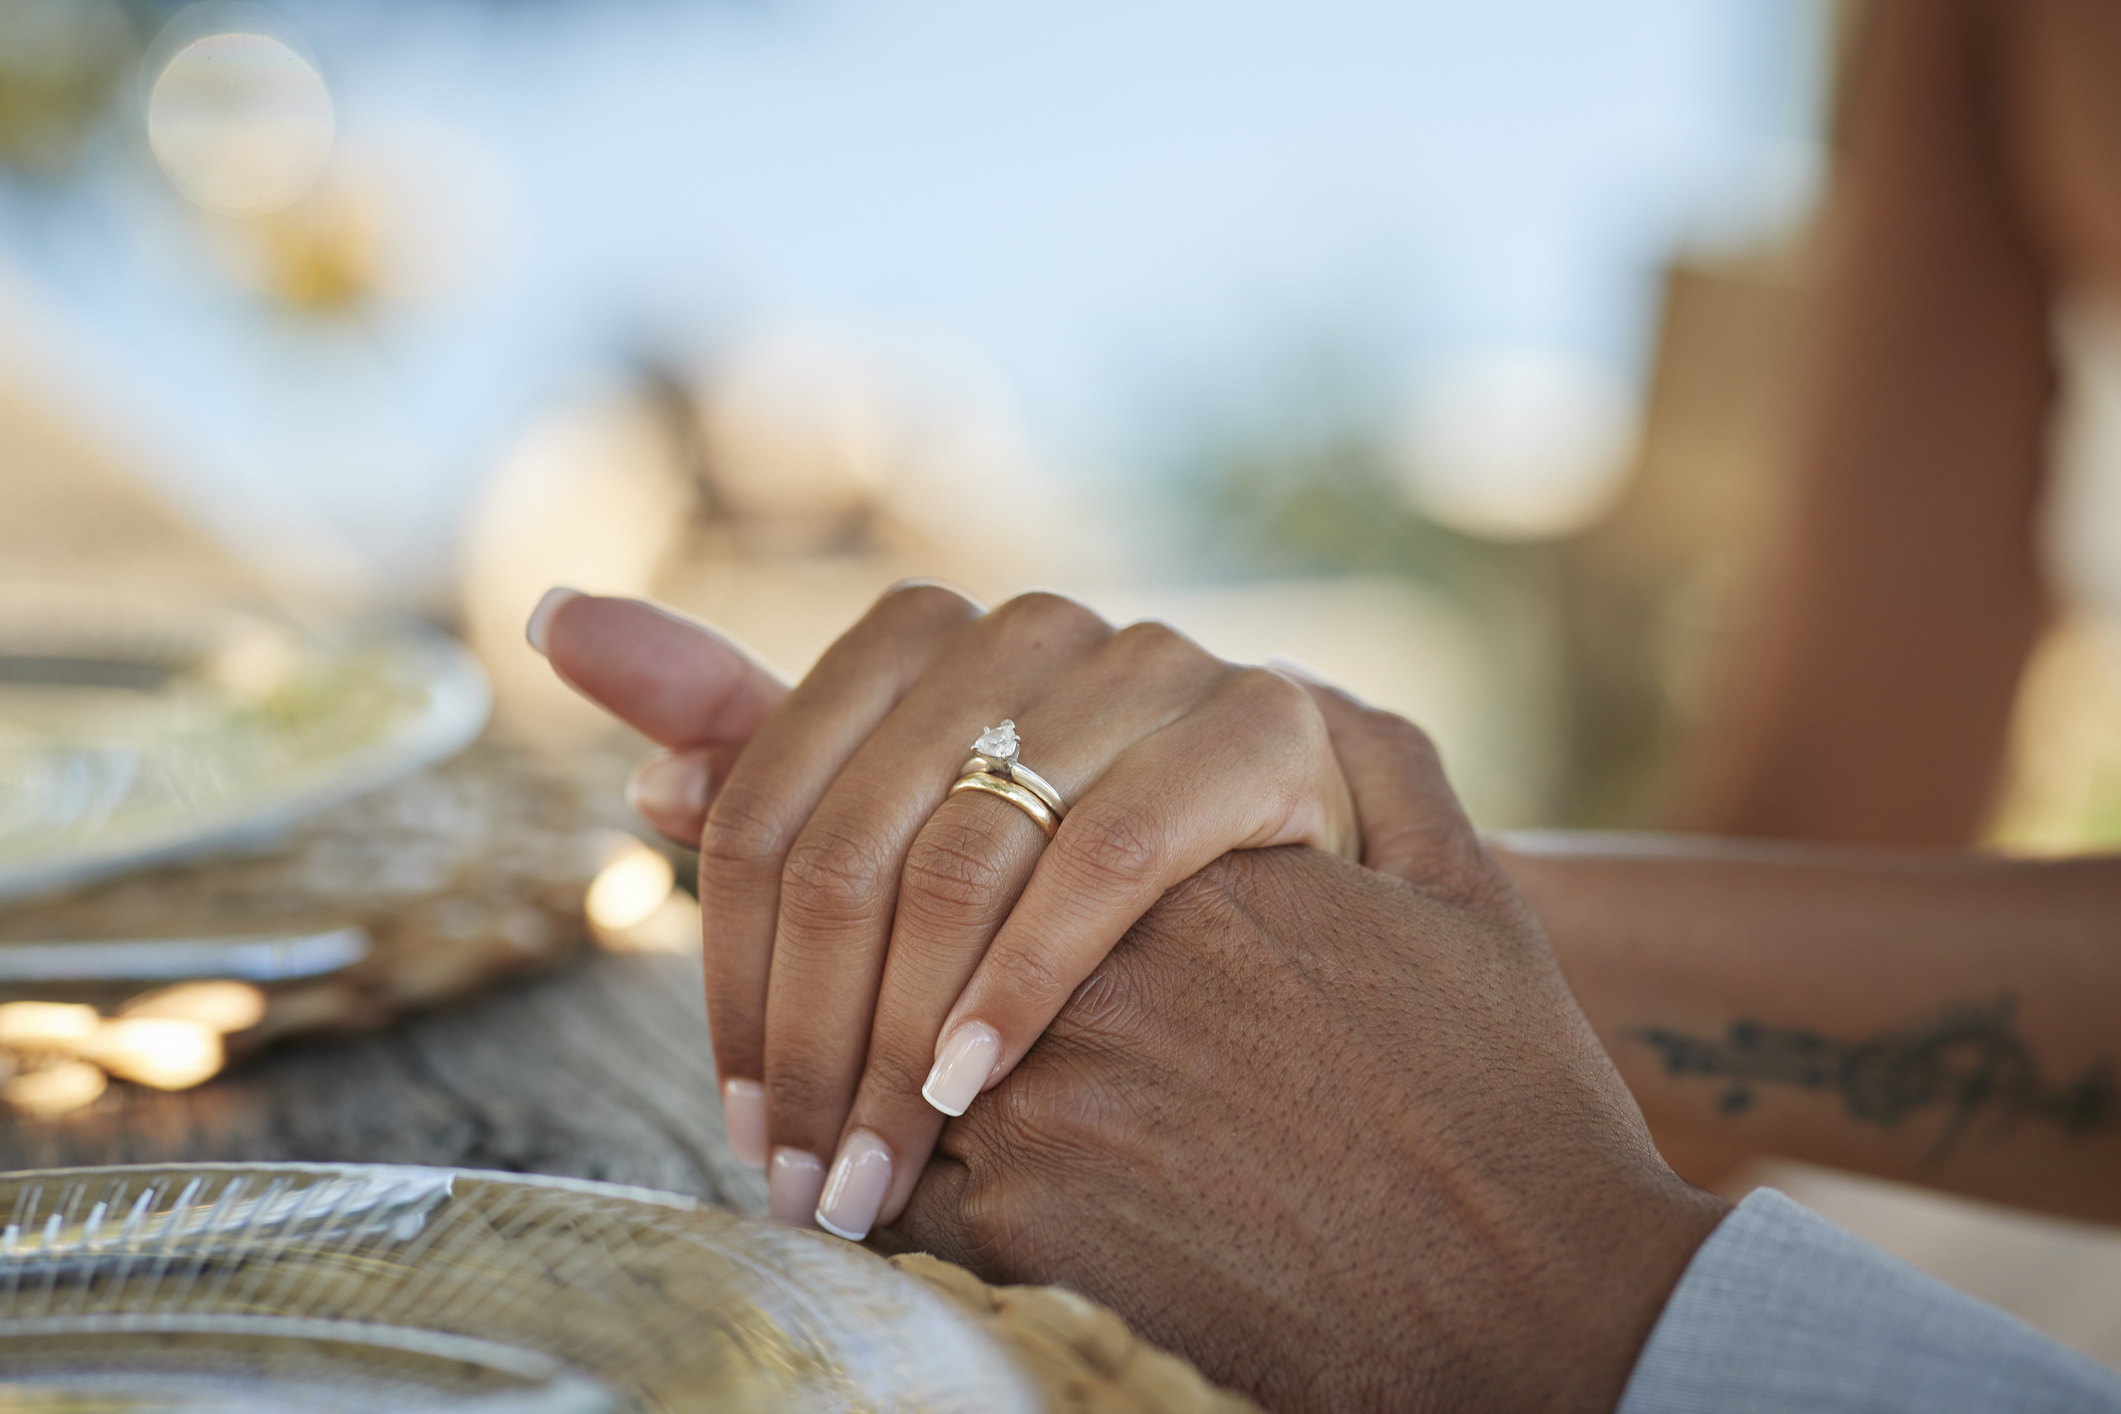 Hands with engagement rings holding one another